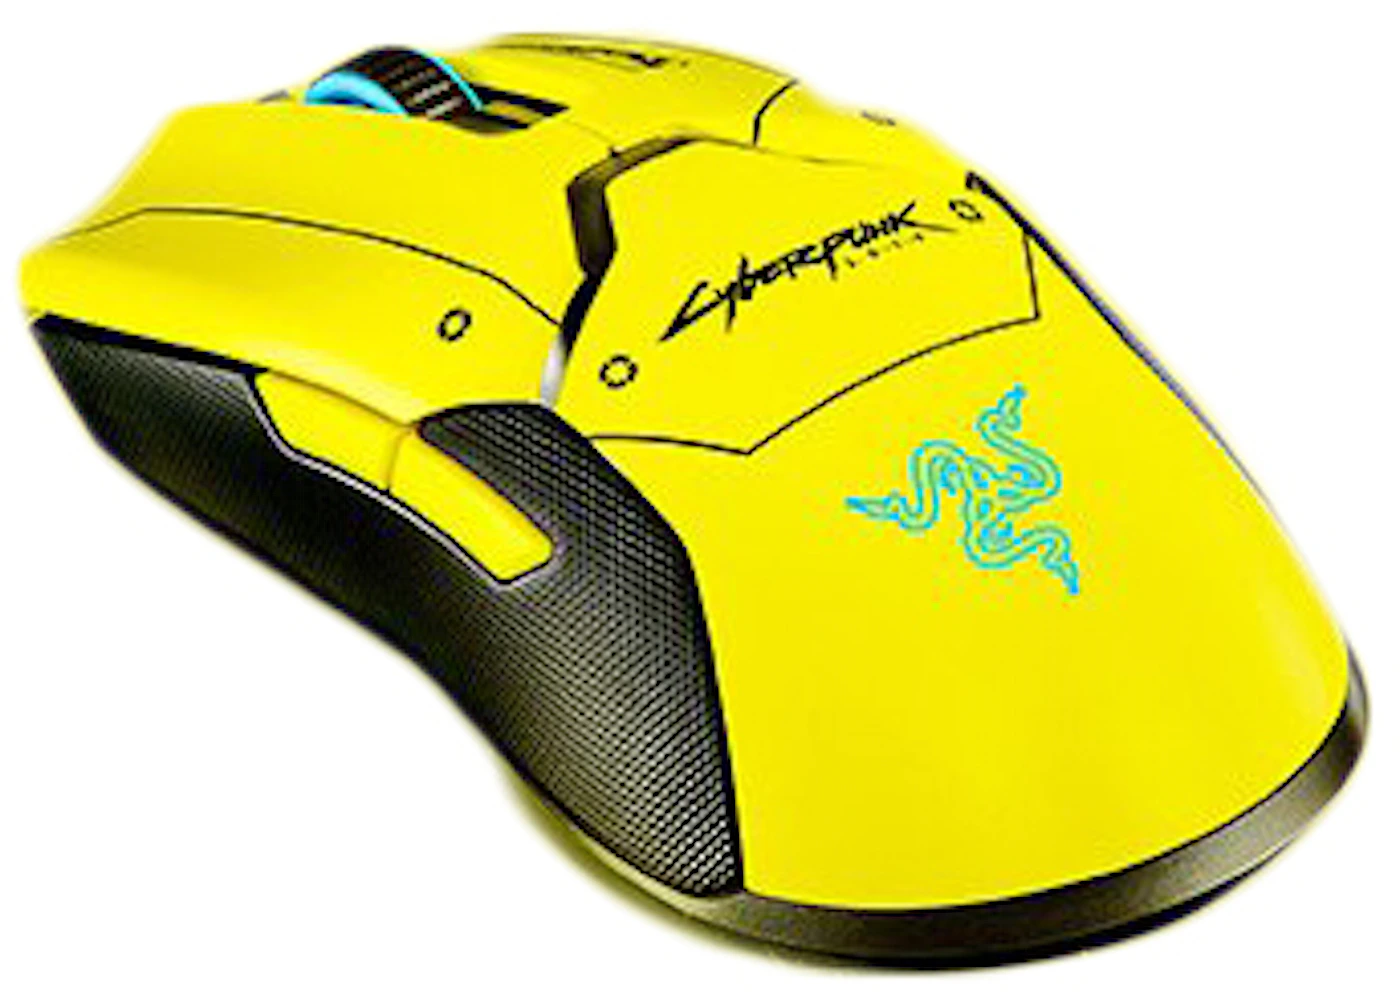 Gaming Mouse Viper Ultimate Cyberpunk 2077 Edition (Yellow Version)